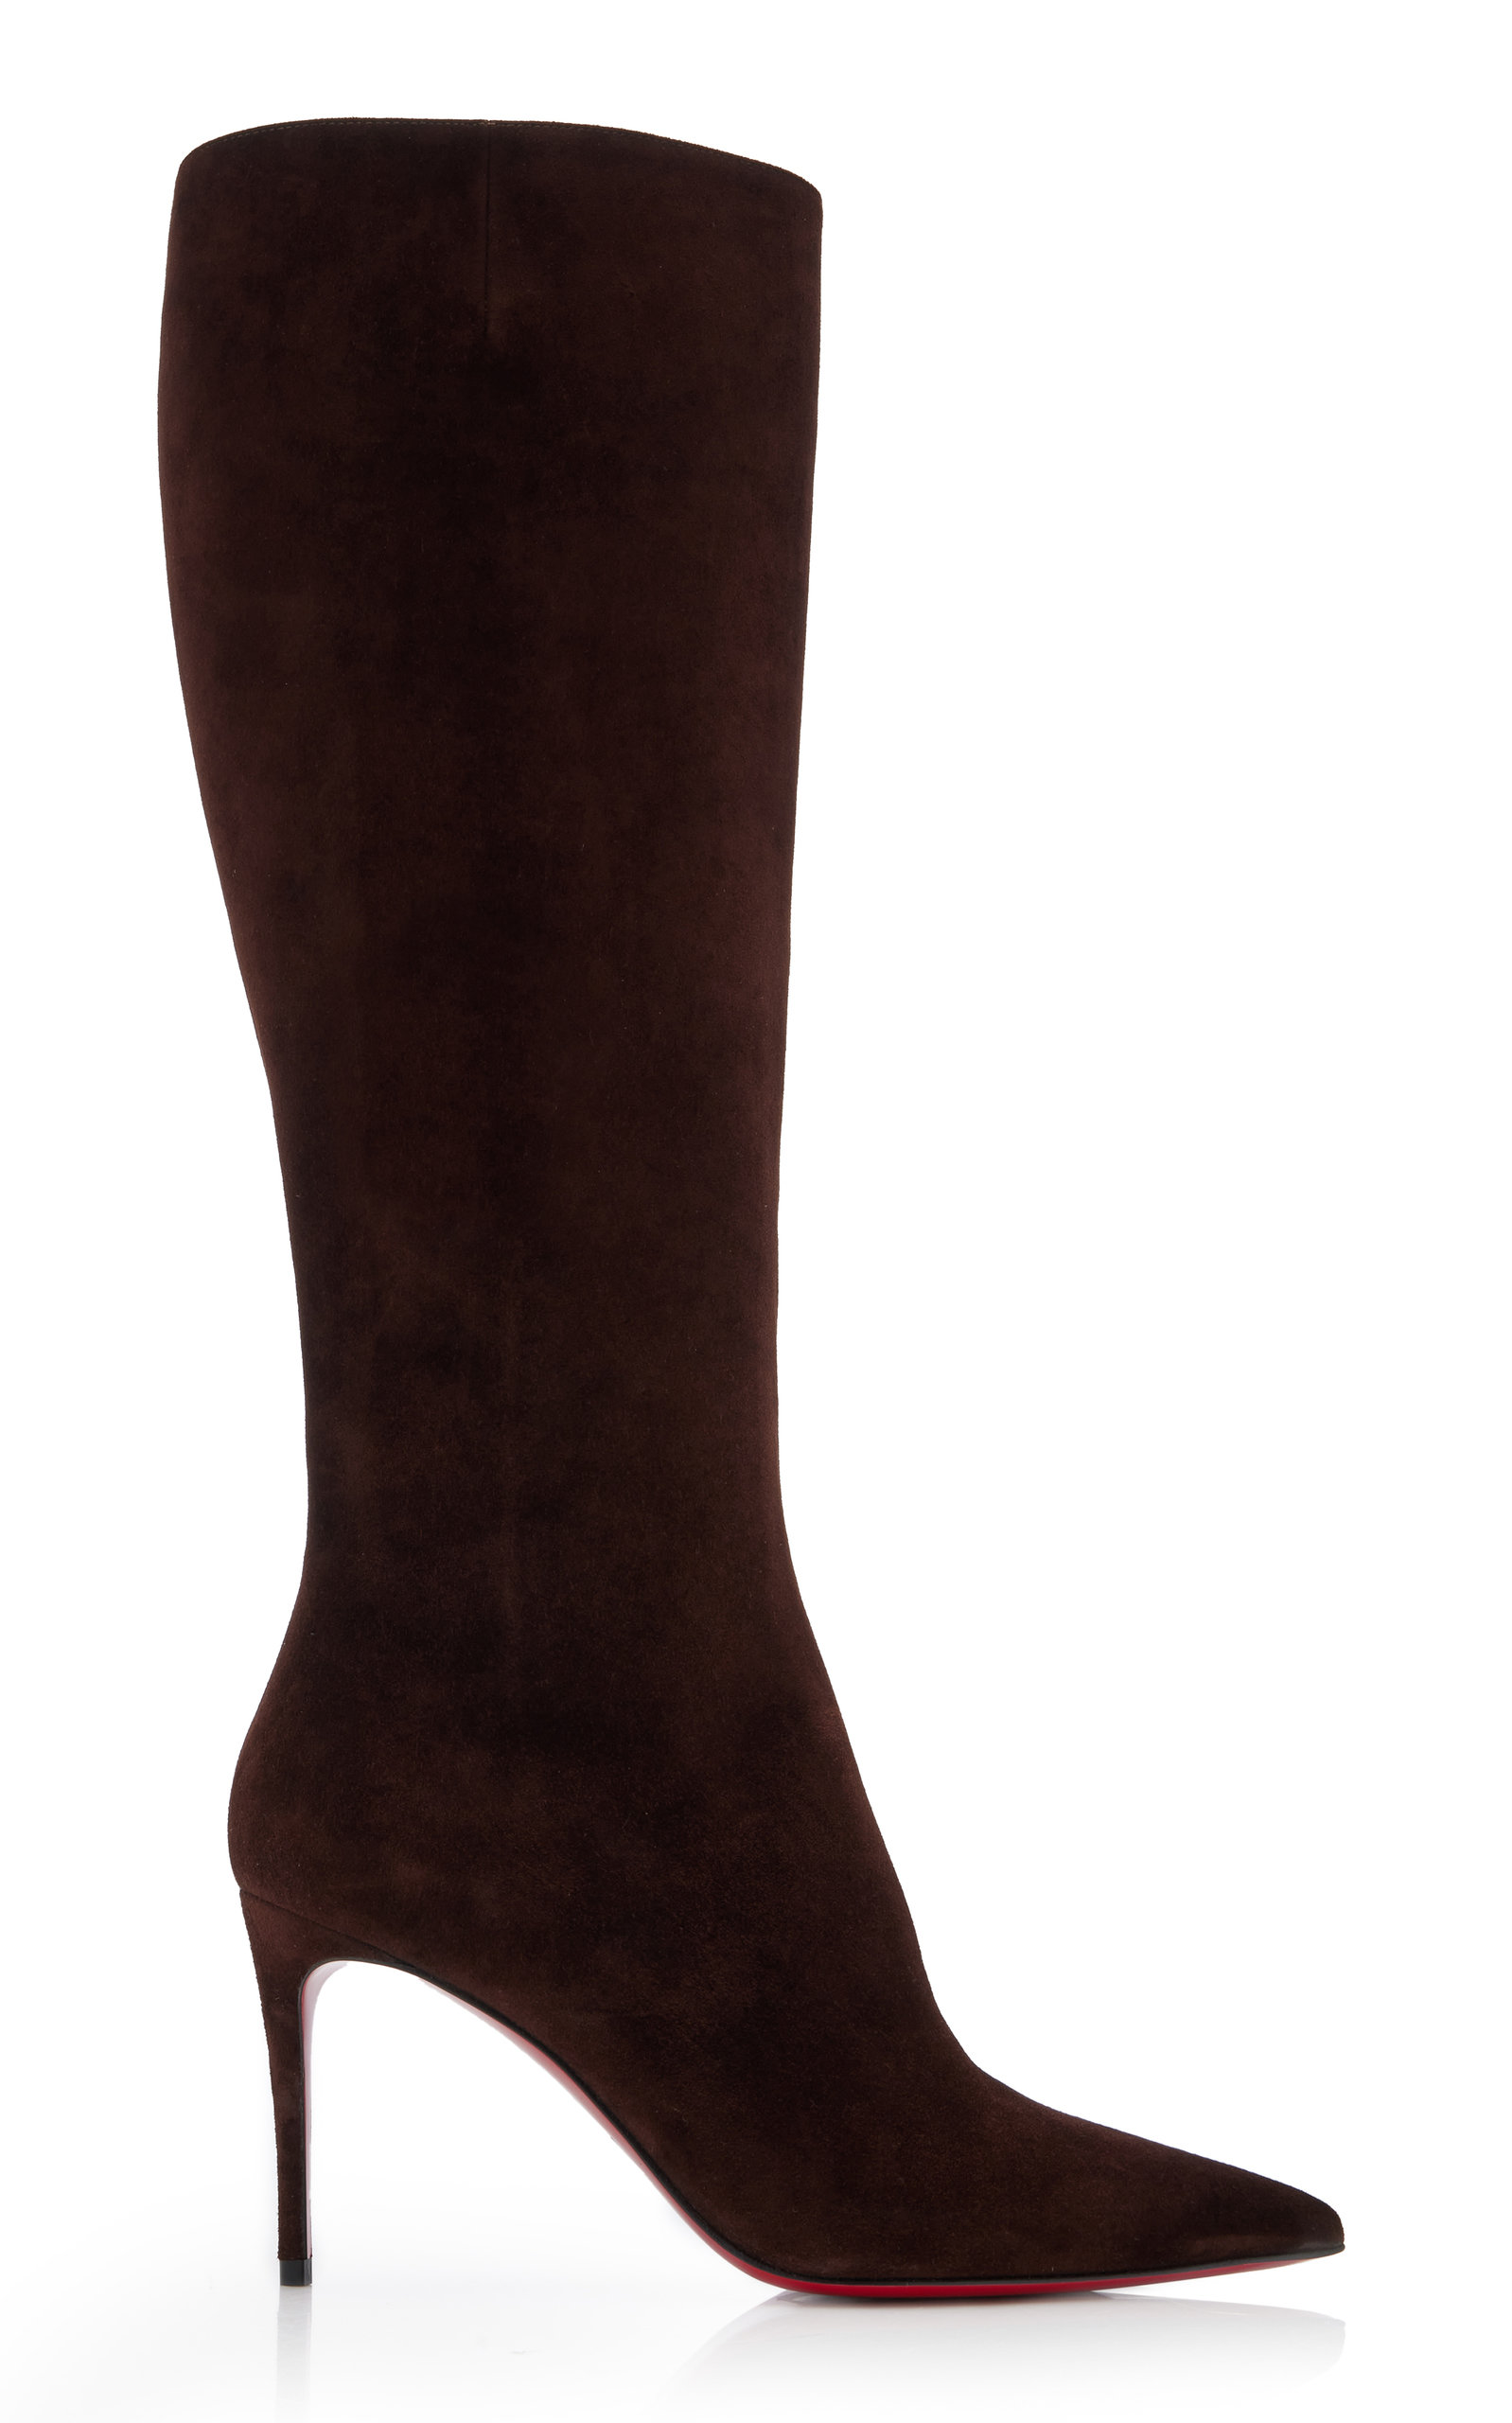 Kate Botta 85 Leather Knee High Boots in Black - Christian Louboutin